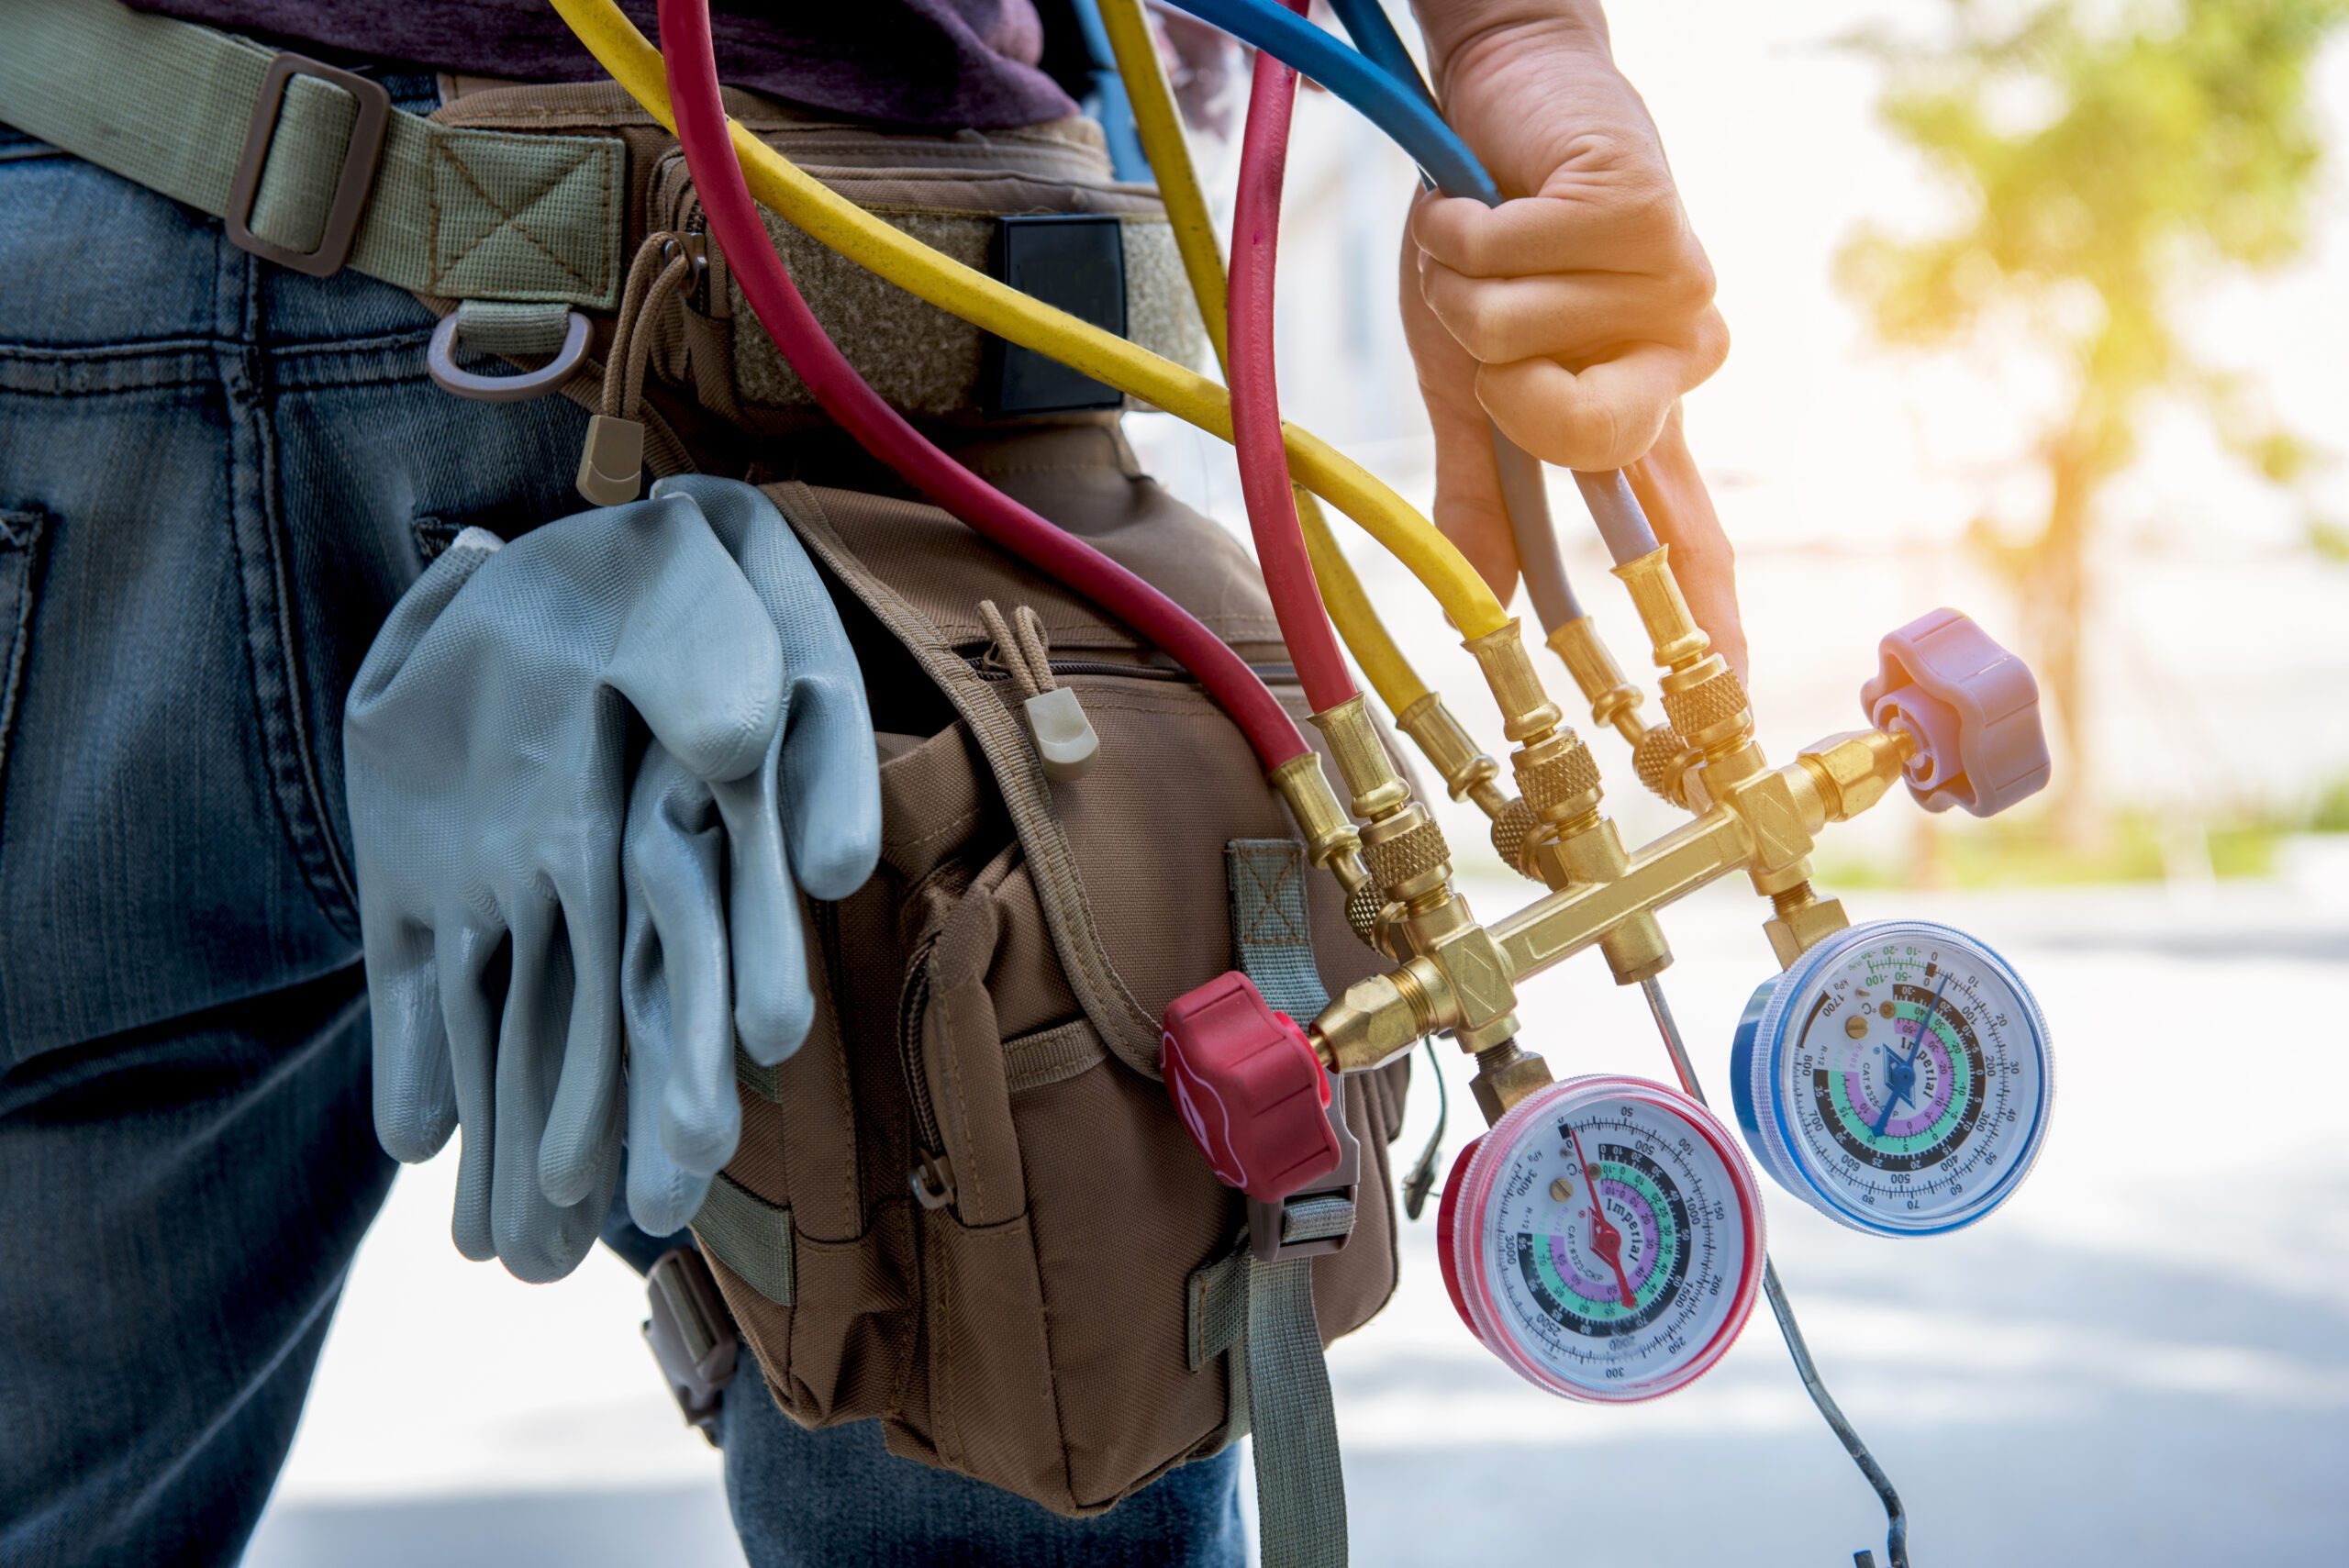 Featured image for “5 HVAC Troubleshooting Tips That Every Homeowner Should Know”